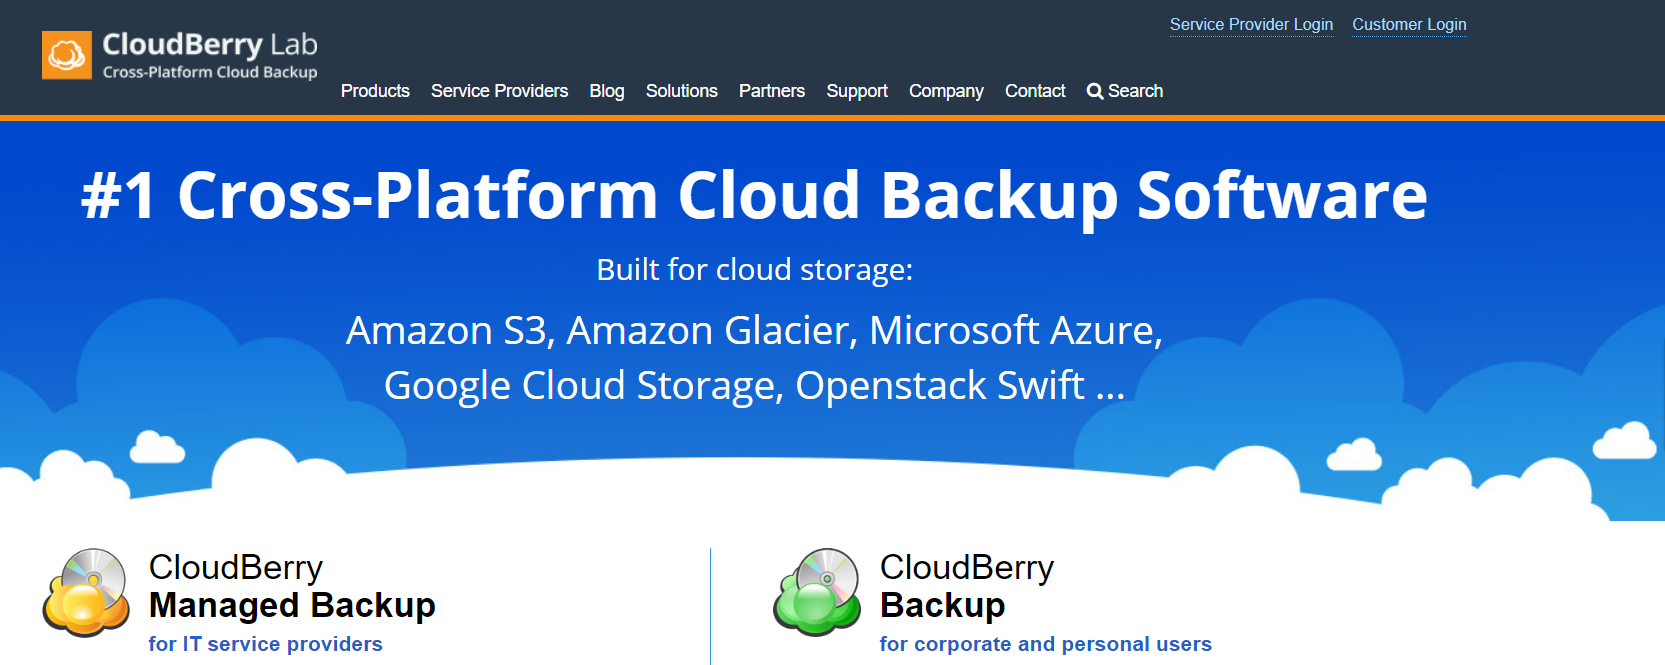 CloudBerry Backup- Best Cloud Backup Service For Mac